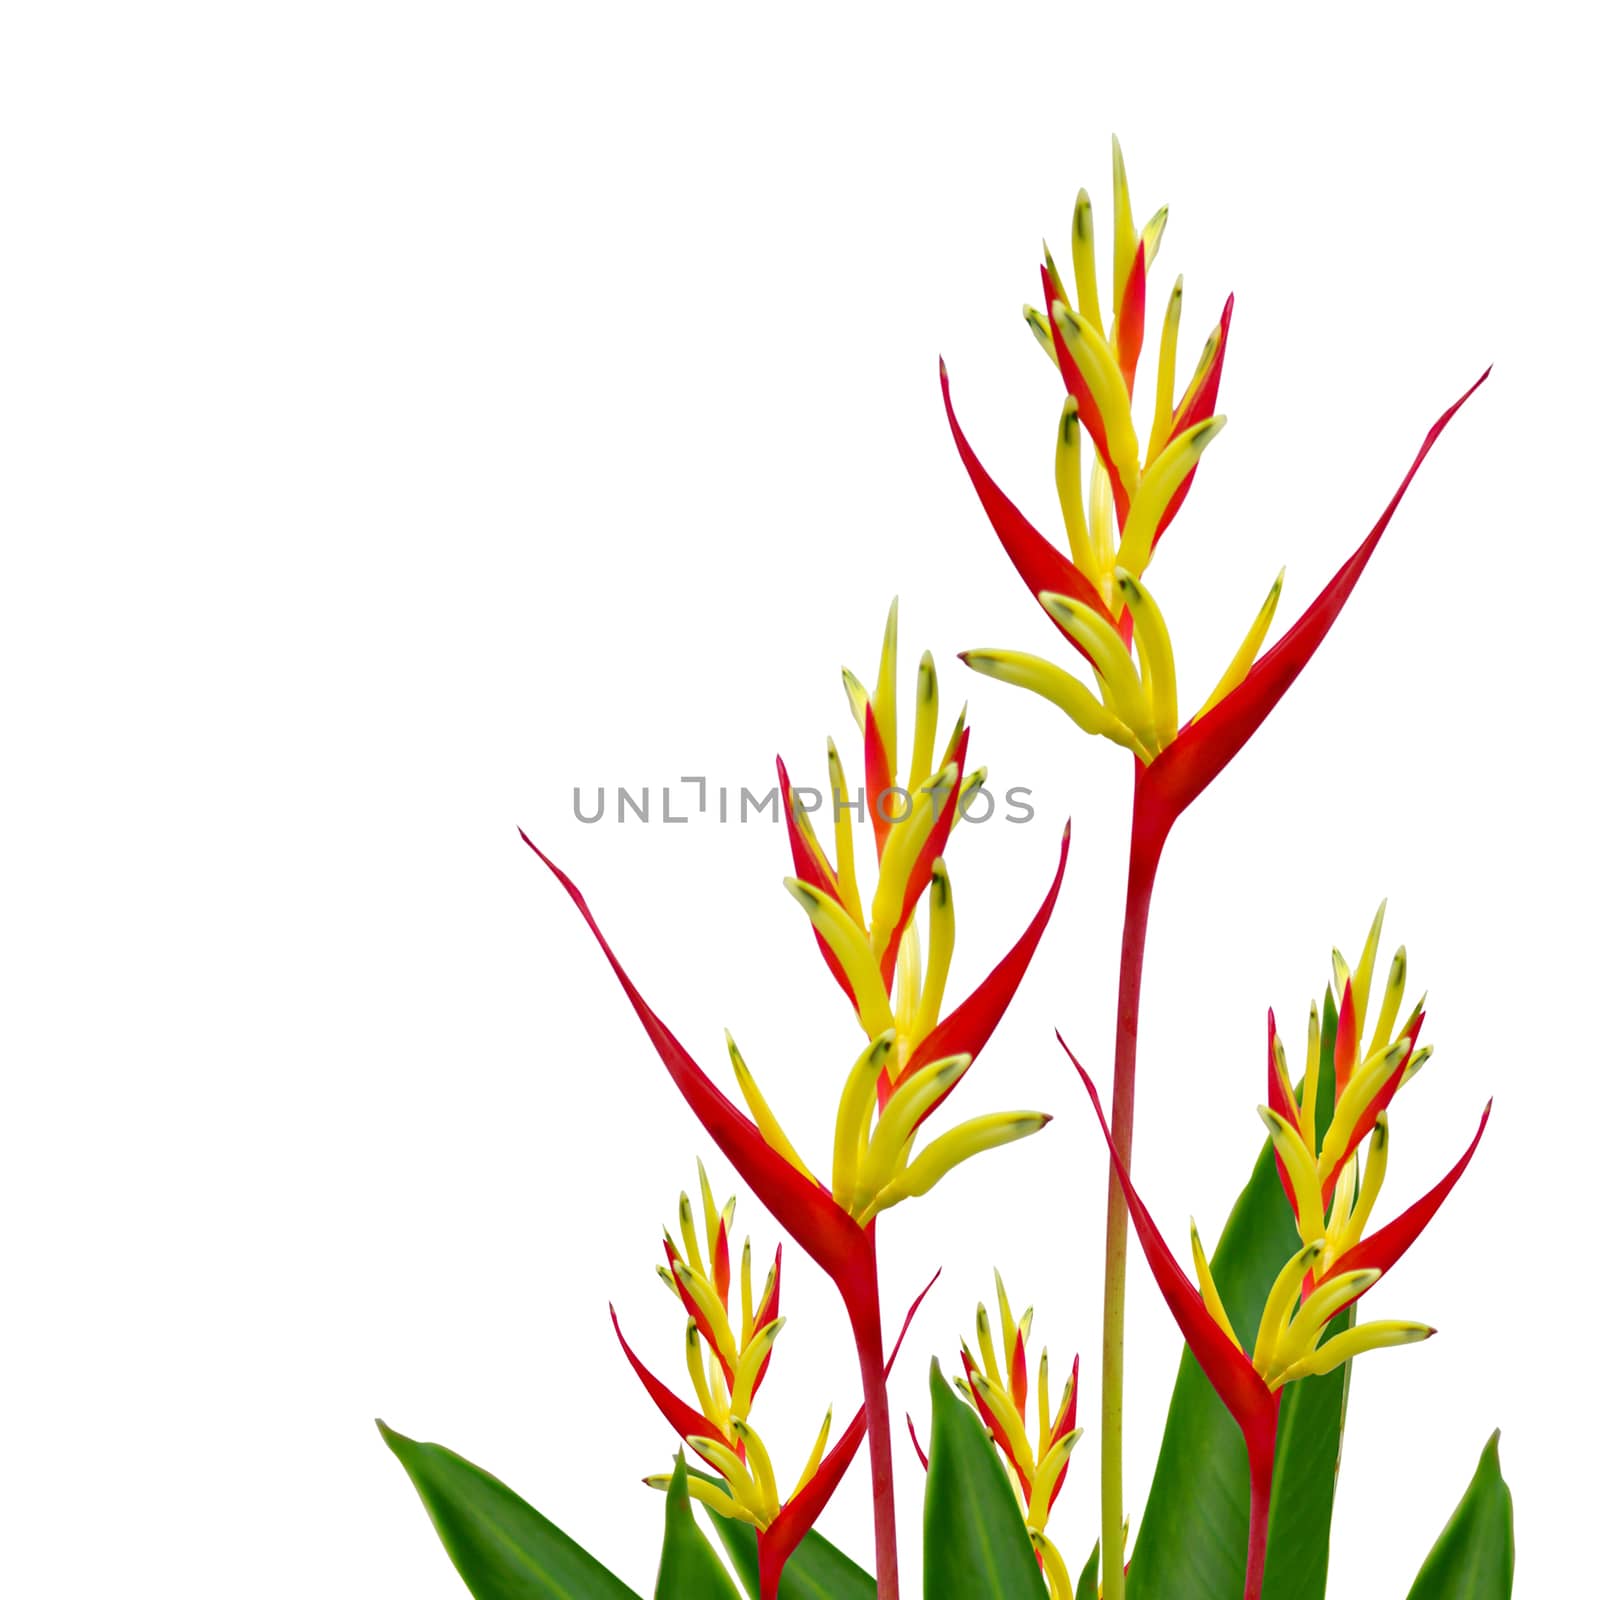 Parrot Heliconia islated on white background